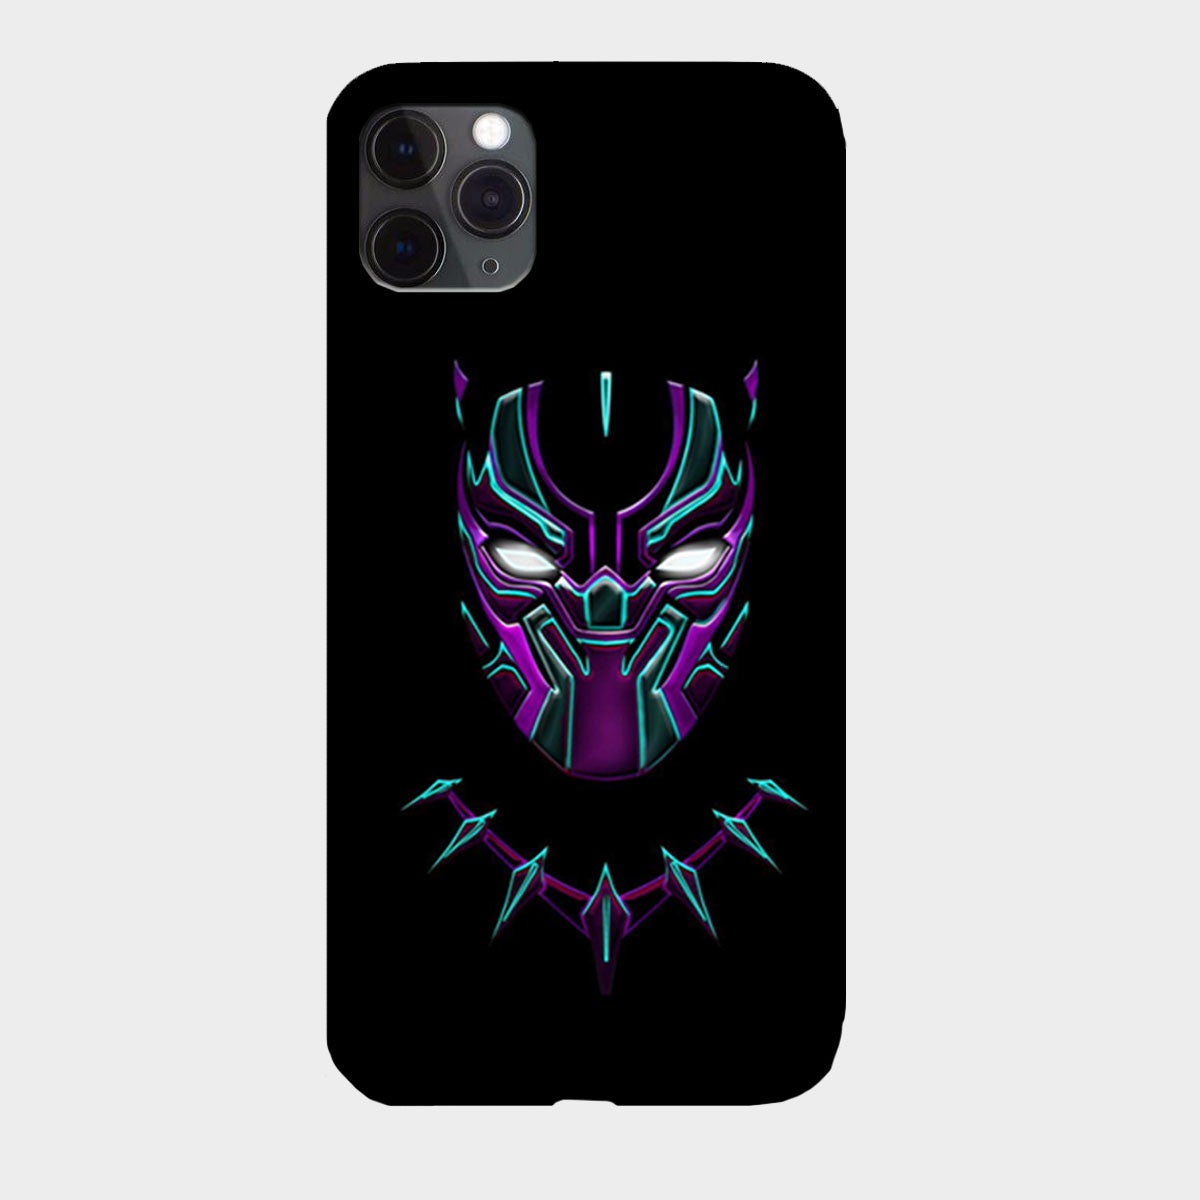 Black Panther - Mobile Phone Cover - Hard Case